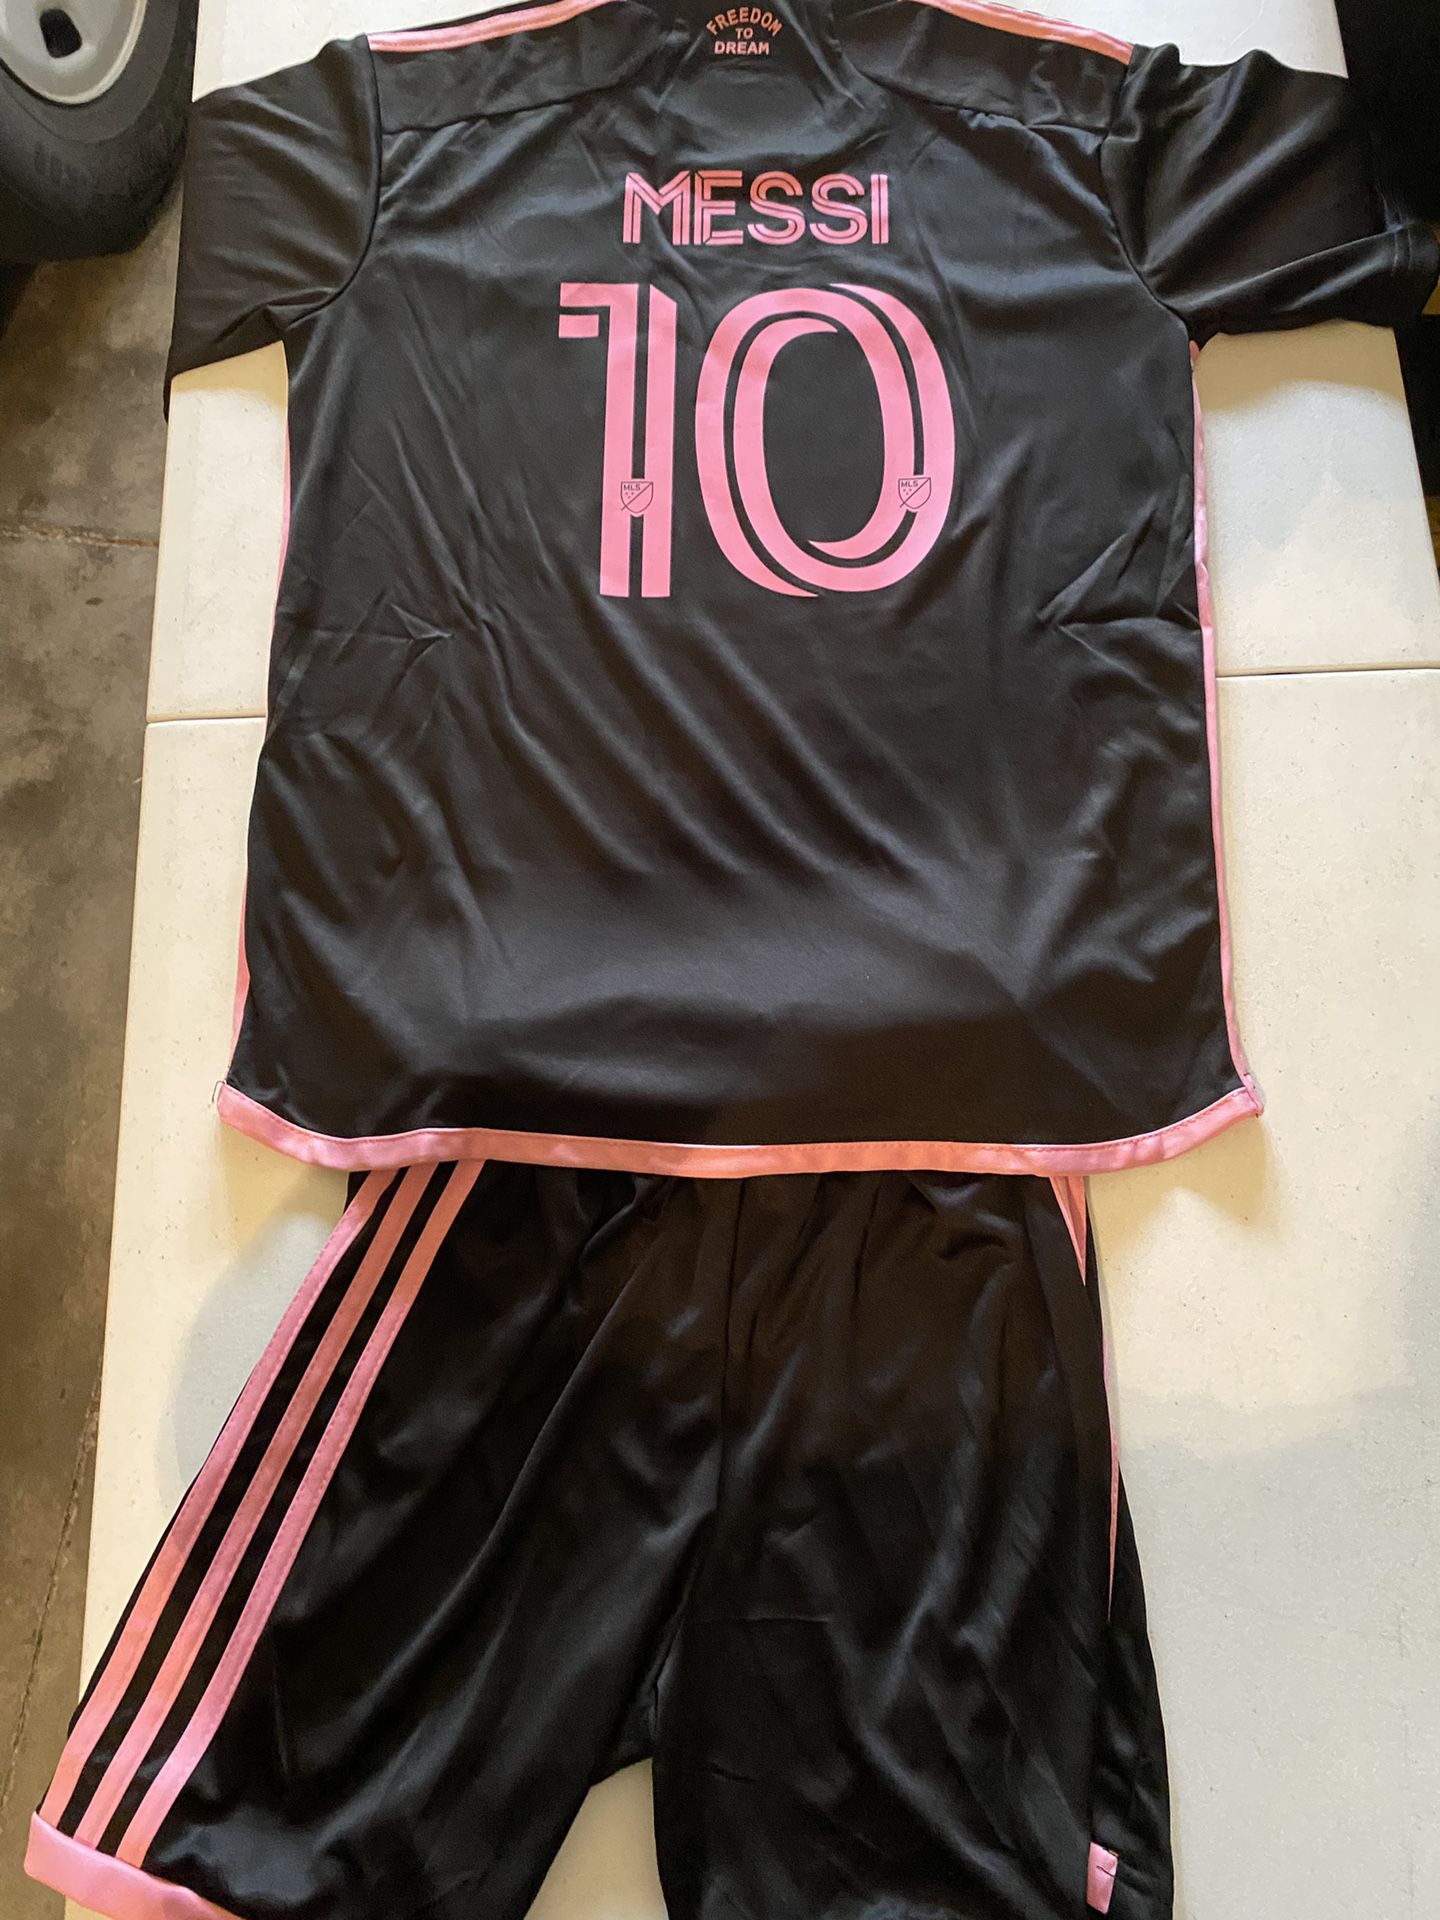 Messi Kids Jerseys With Shorts Sizes Small Up To XL 